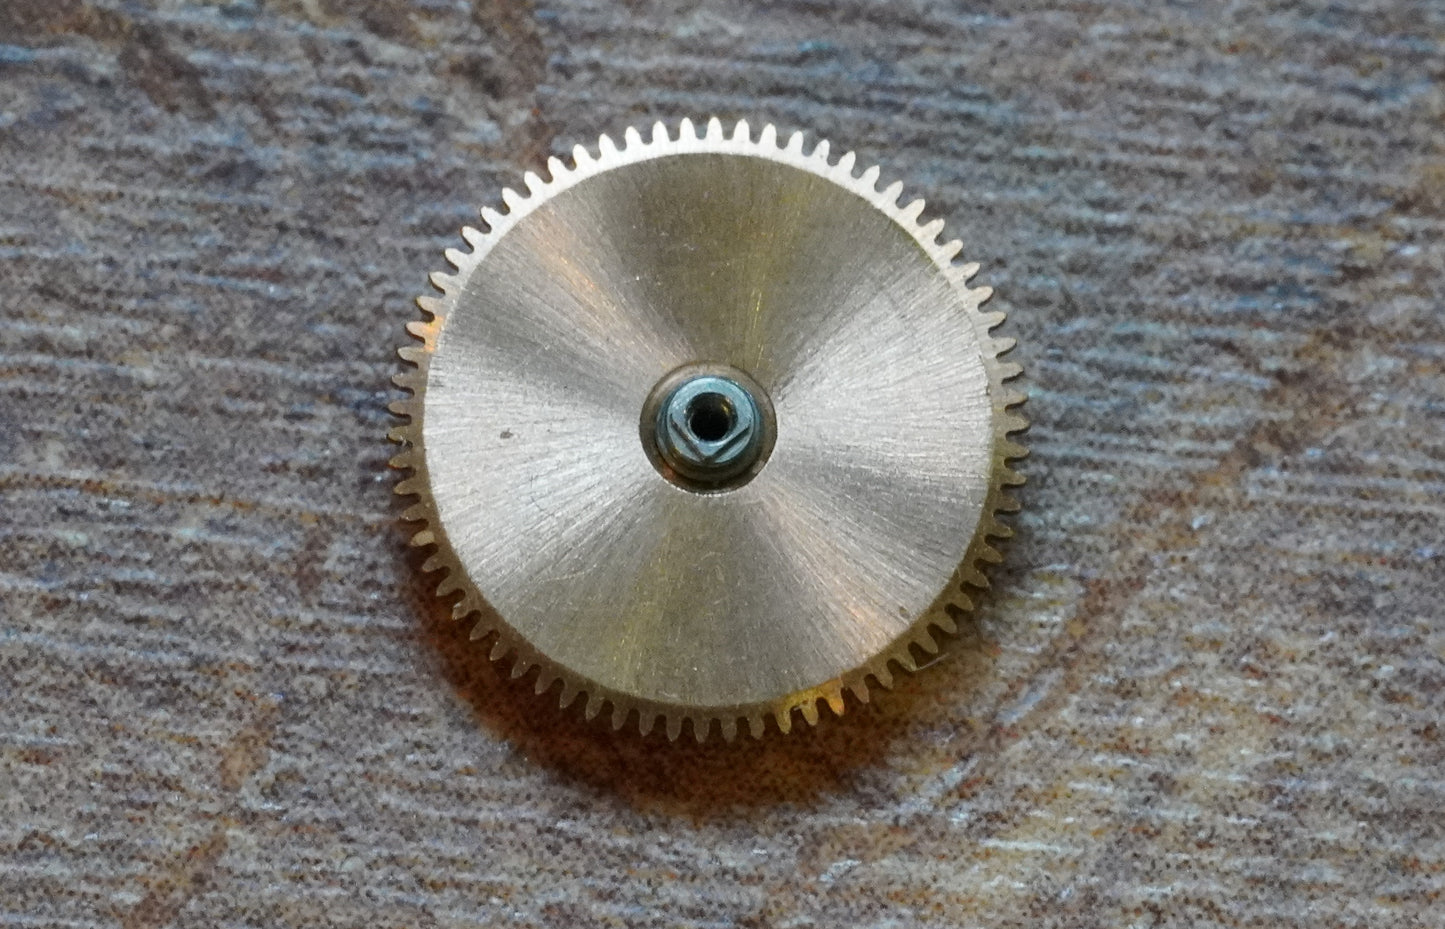 Omega cal 330 part 1200R Barrel with arbor & mainspring